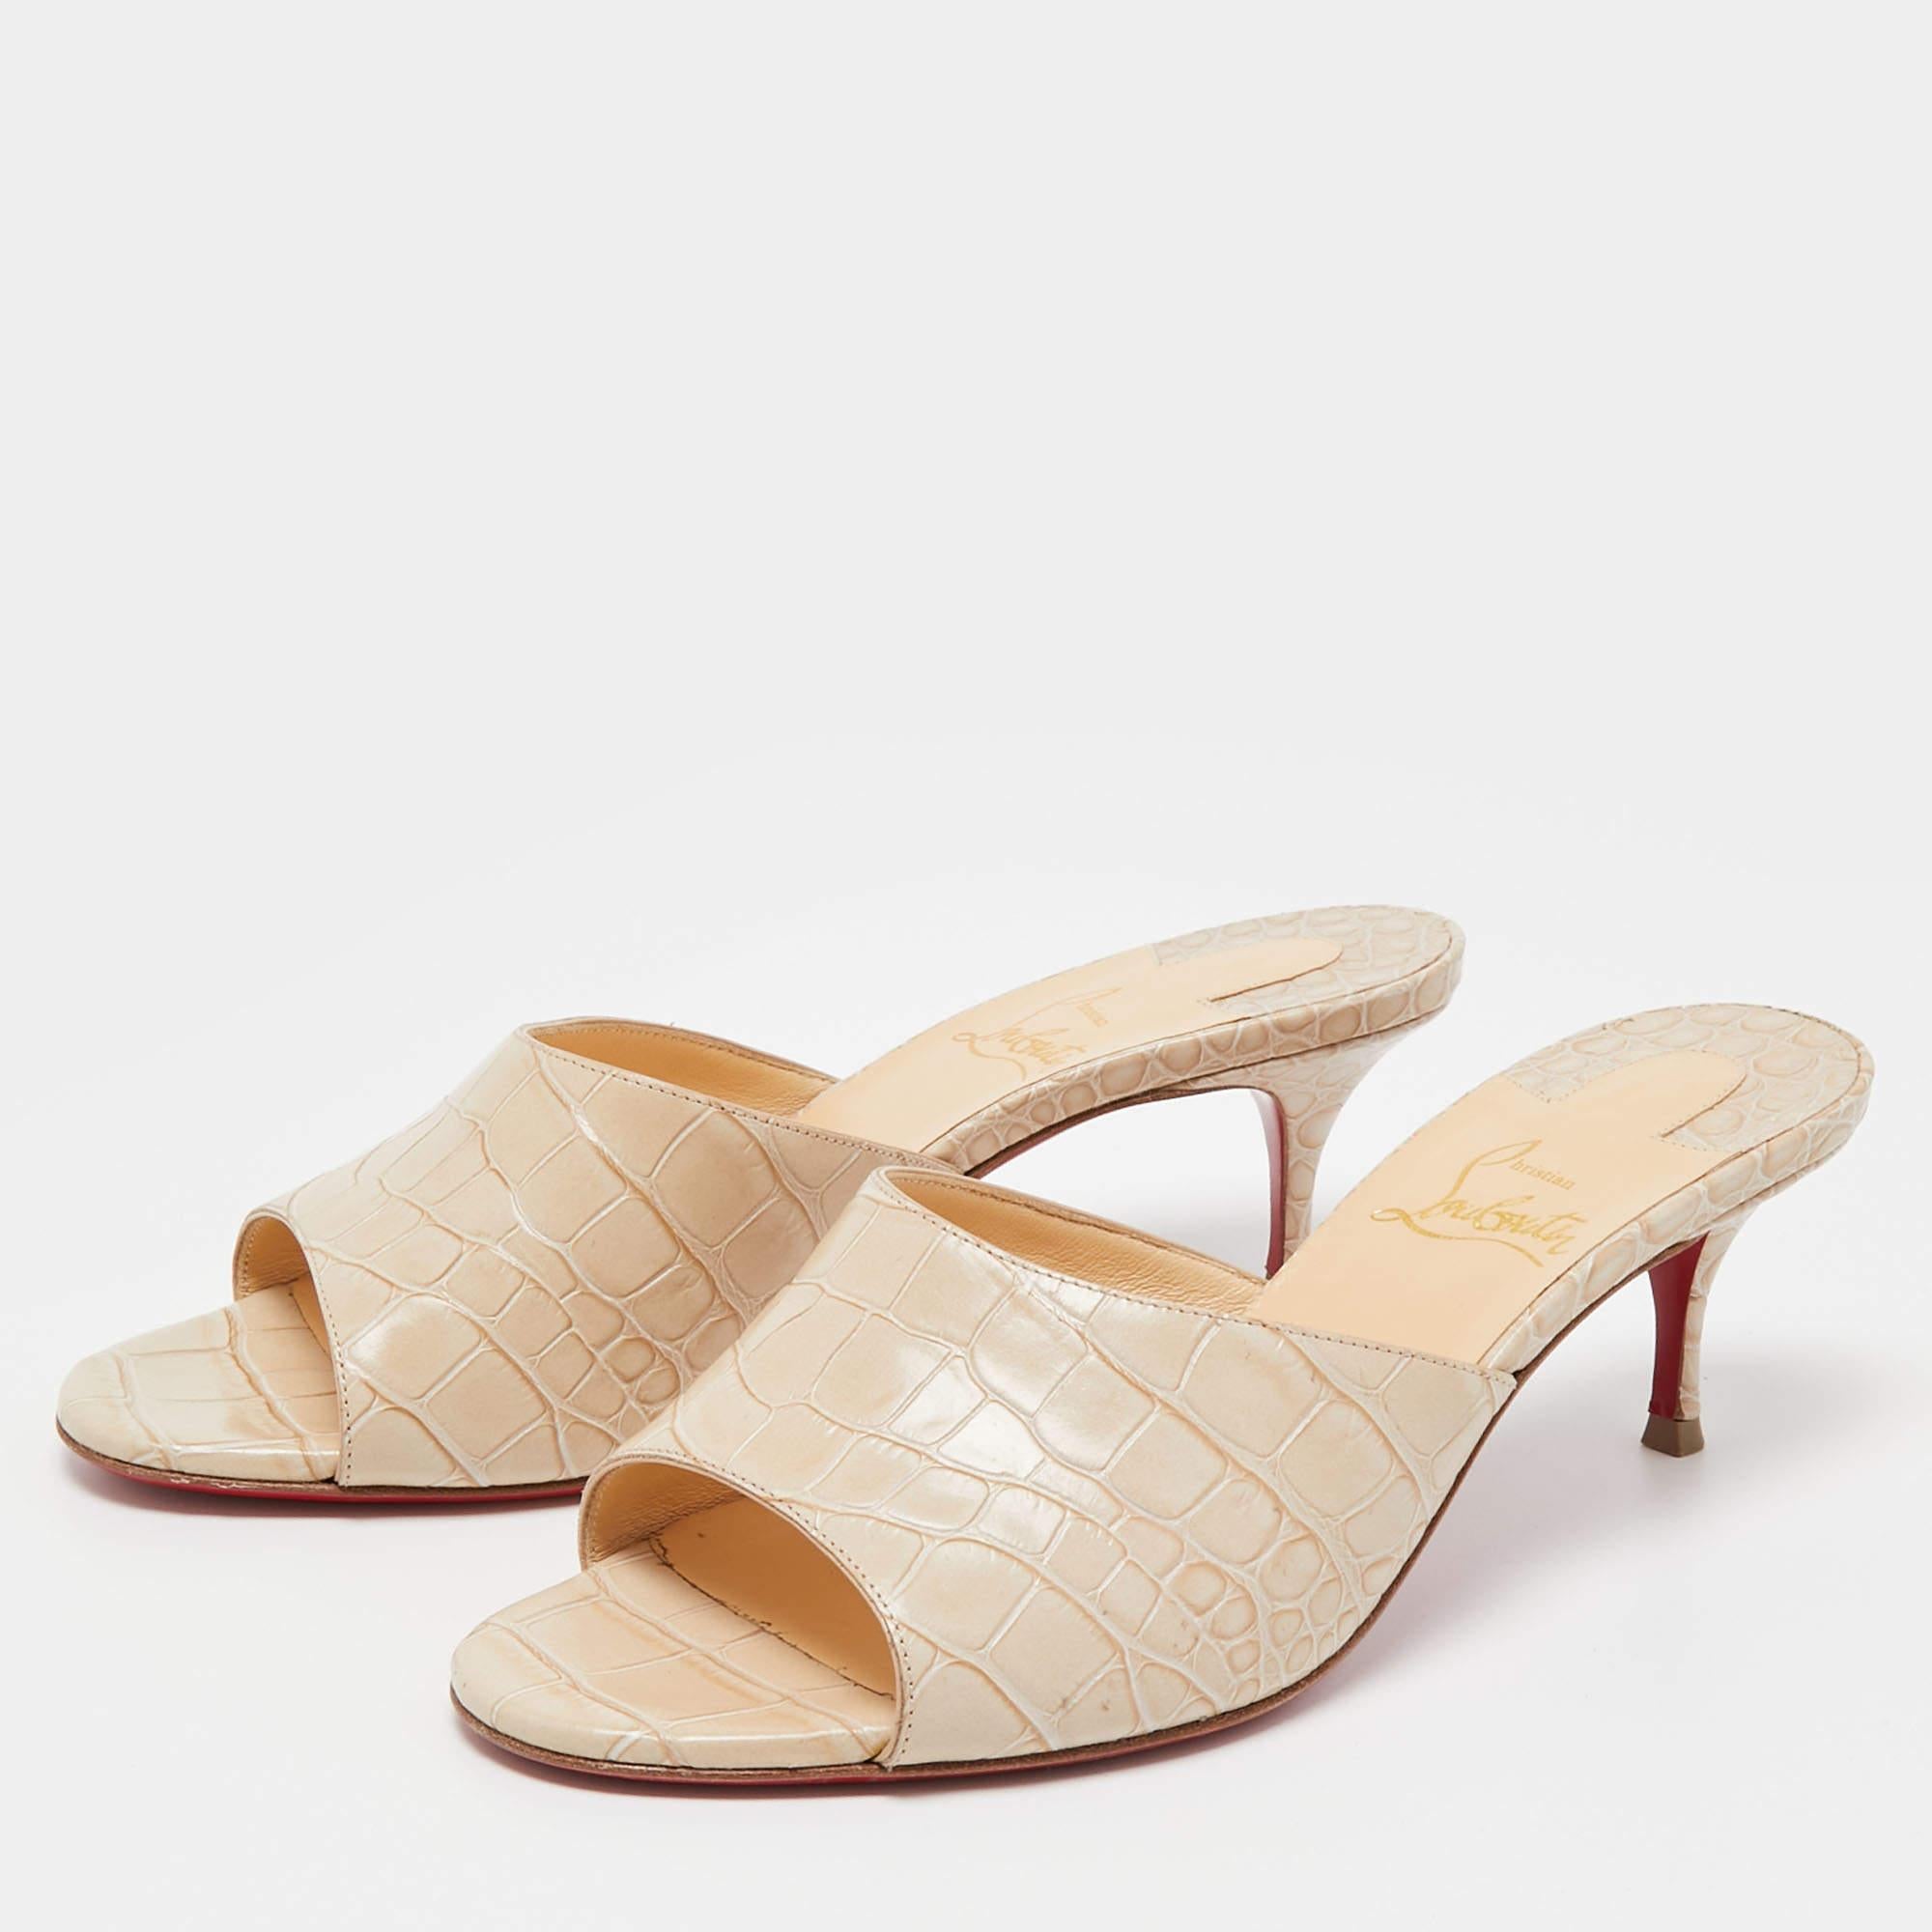 Christian Louboutin Beige Croc Embossed Leather East Slide Sandals Size 37 For Sale 2